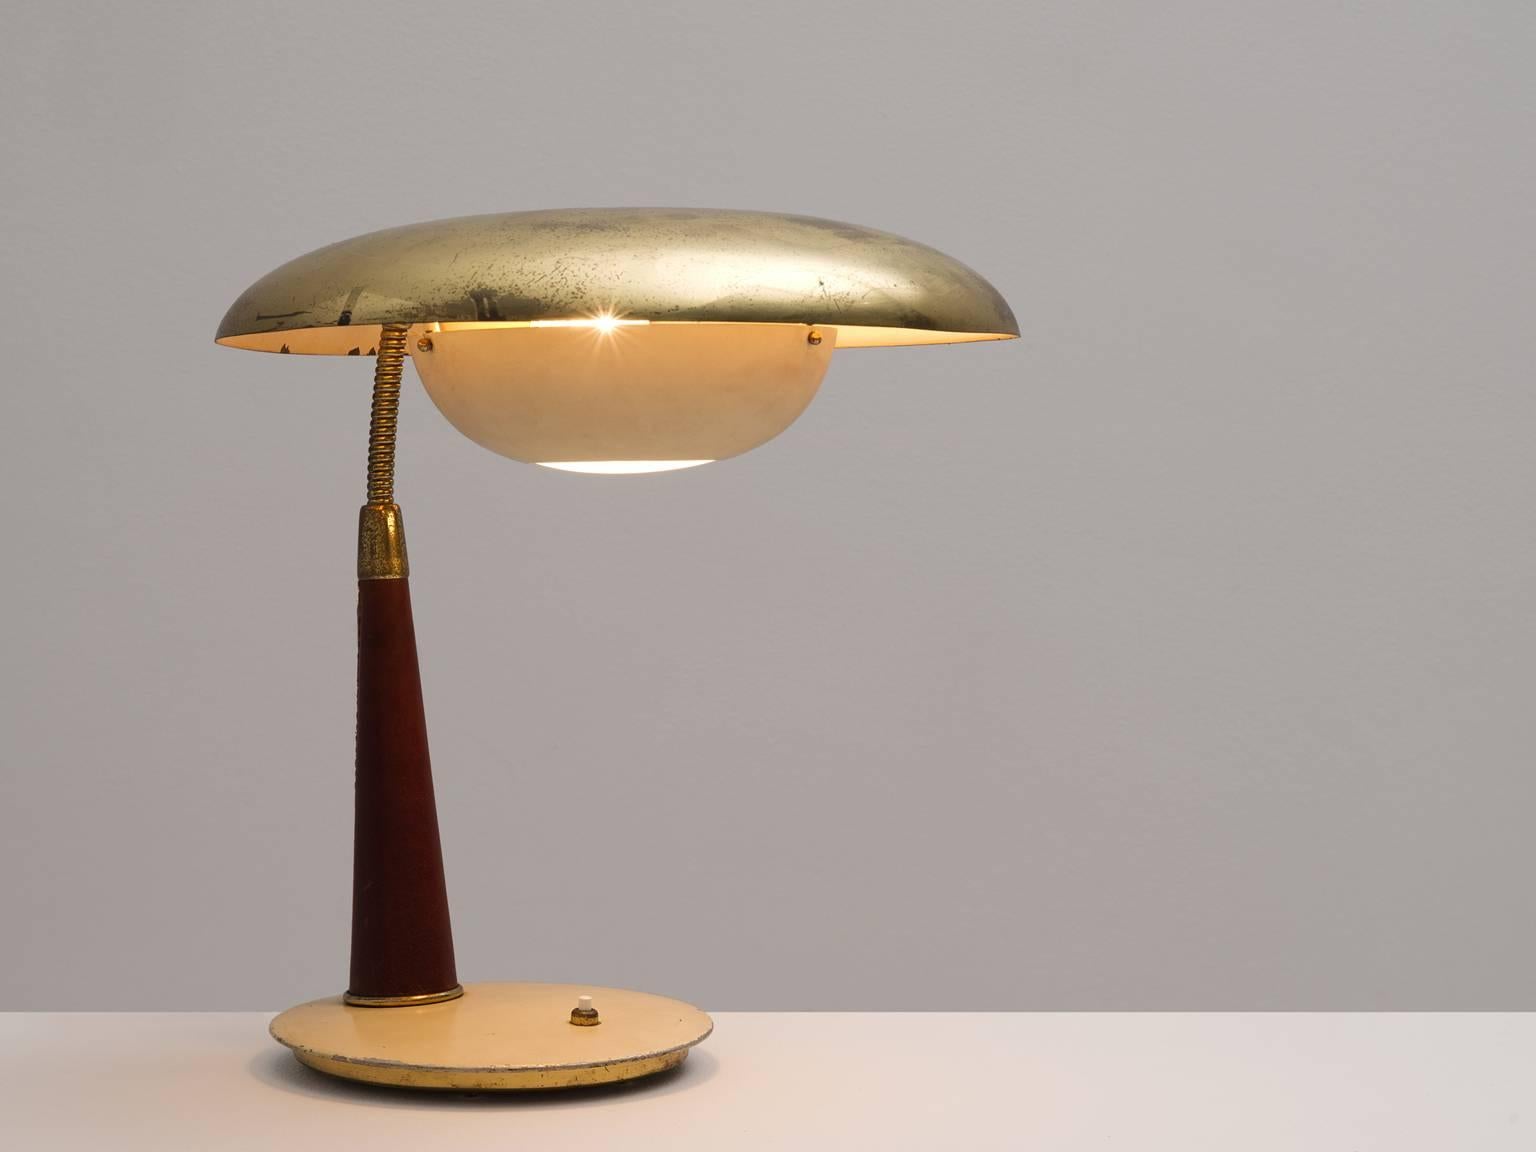 Angelo Lelli for Arredoluce,  table lamp, in brass, metal and leather, by Italy, 1950s. 

Stylish desk light with admirable patinated brass shade, designed by Italian designer Angelo Lelli. The disc-shaped shade has an opposite shade as diffuser.